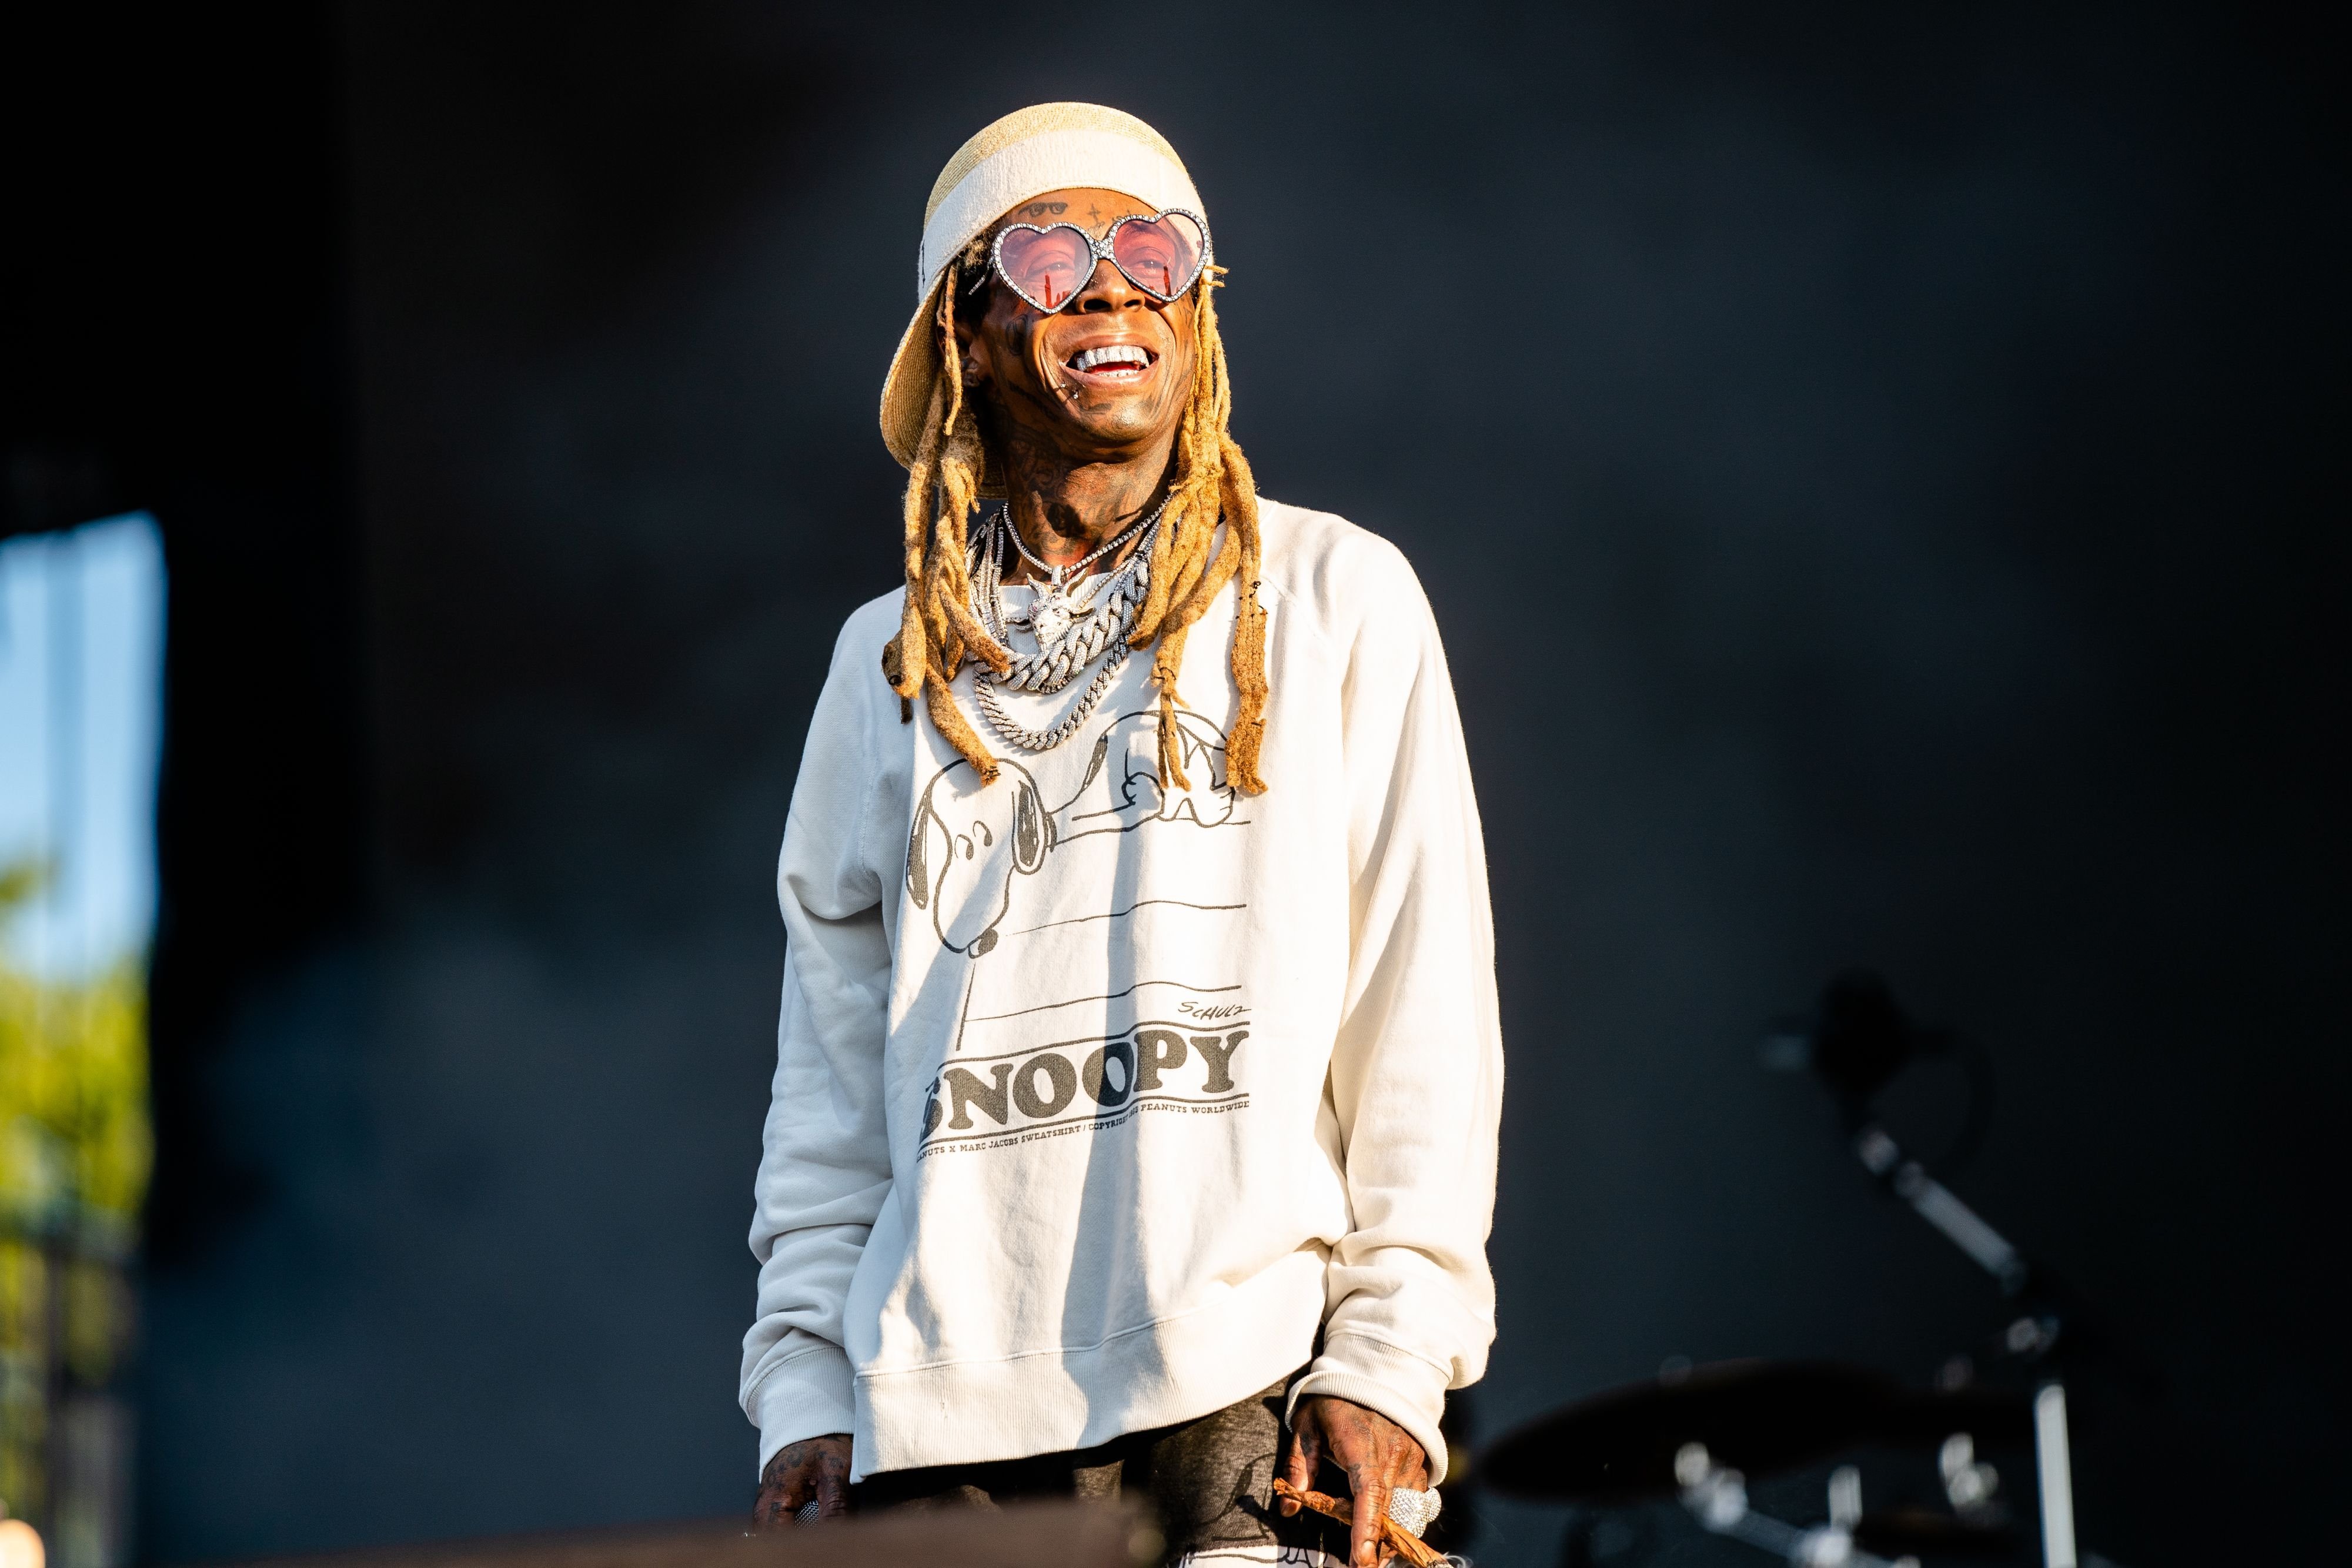 Lil Wayne at the Lollapalooza Music Festival at Grant Park on August 03, 2019. | Source: Getty Images